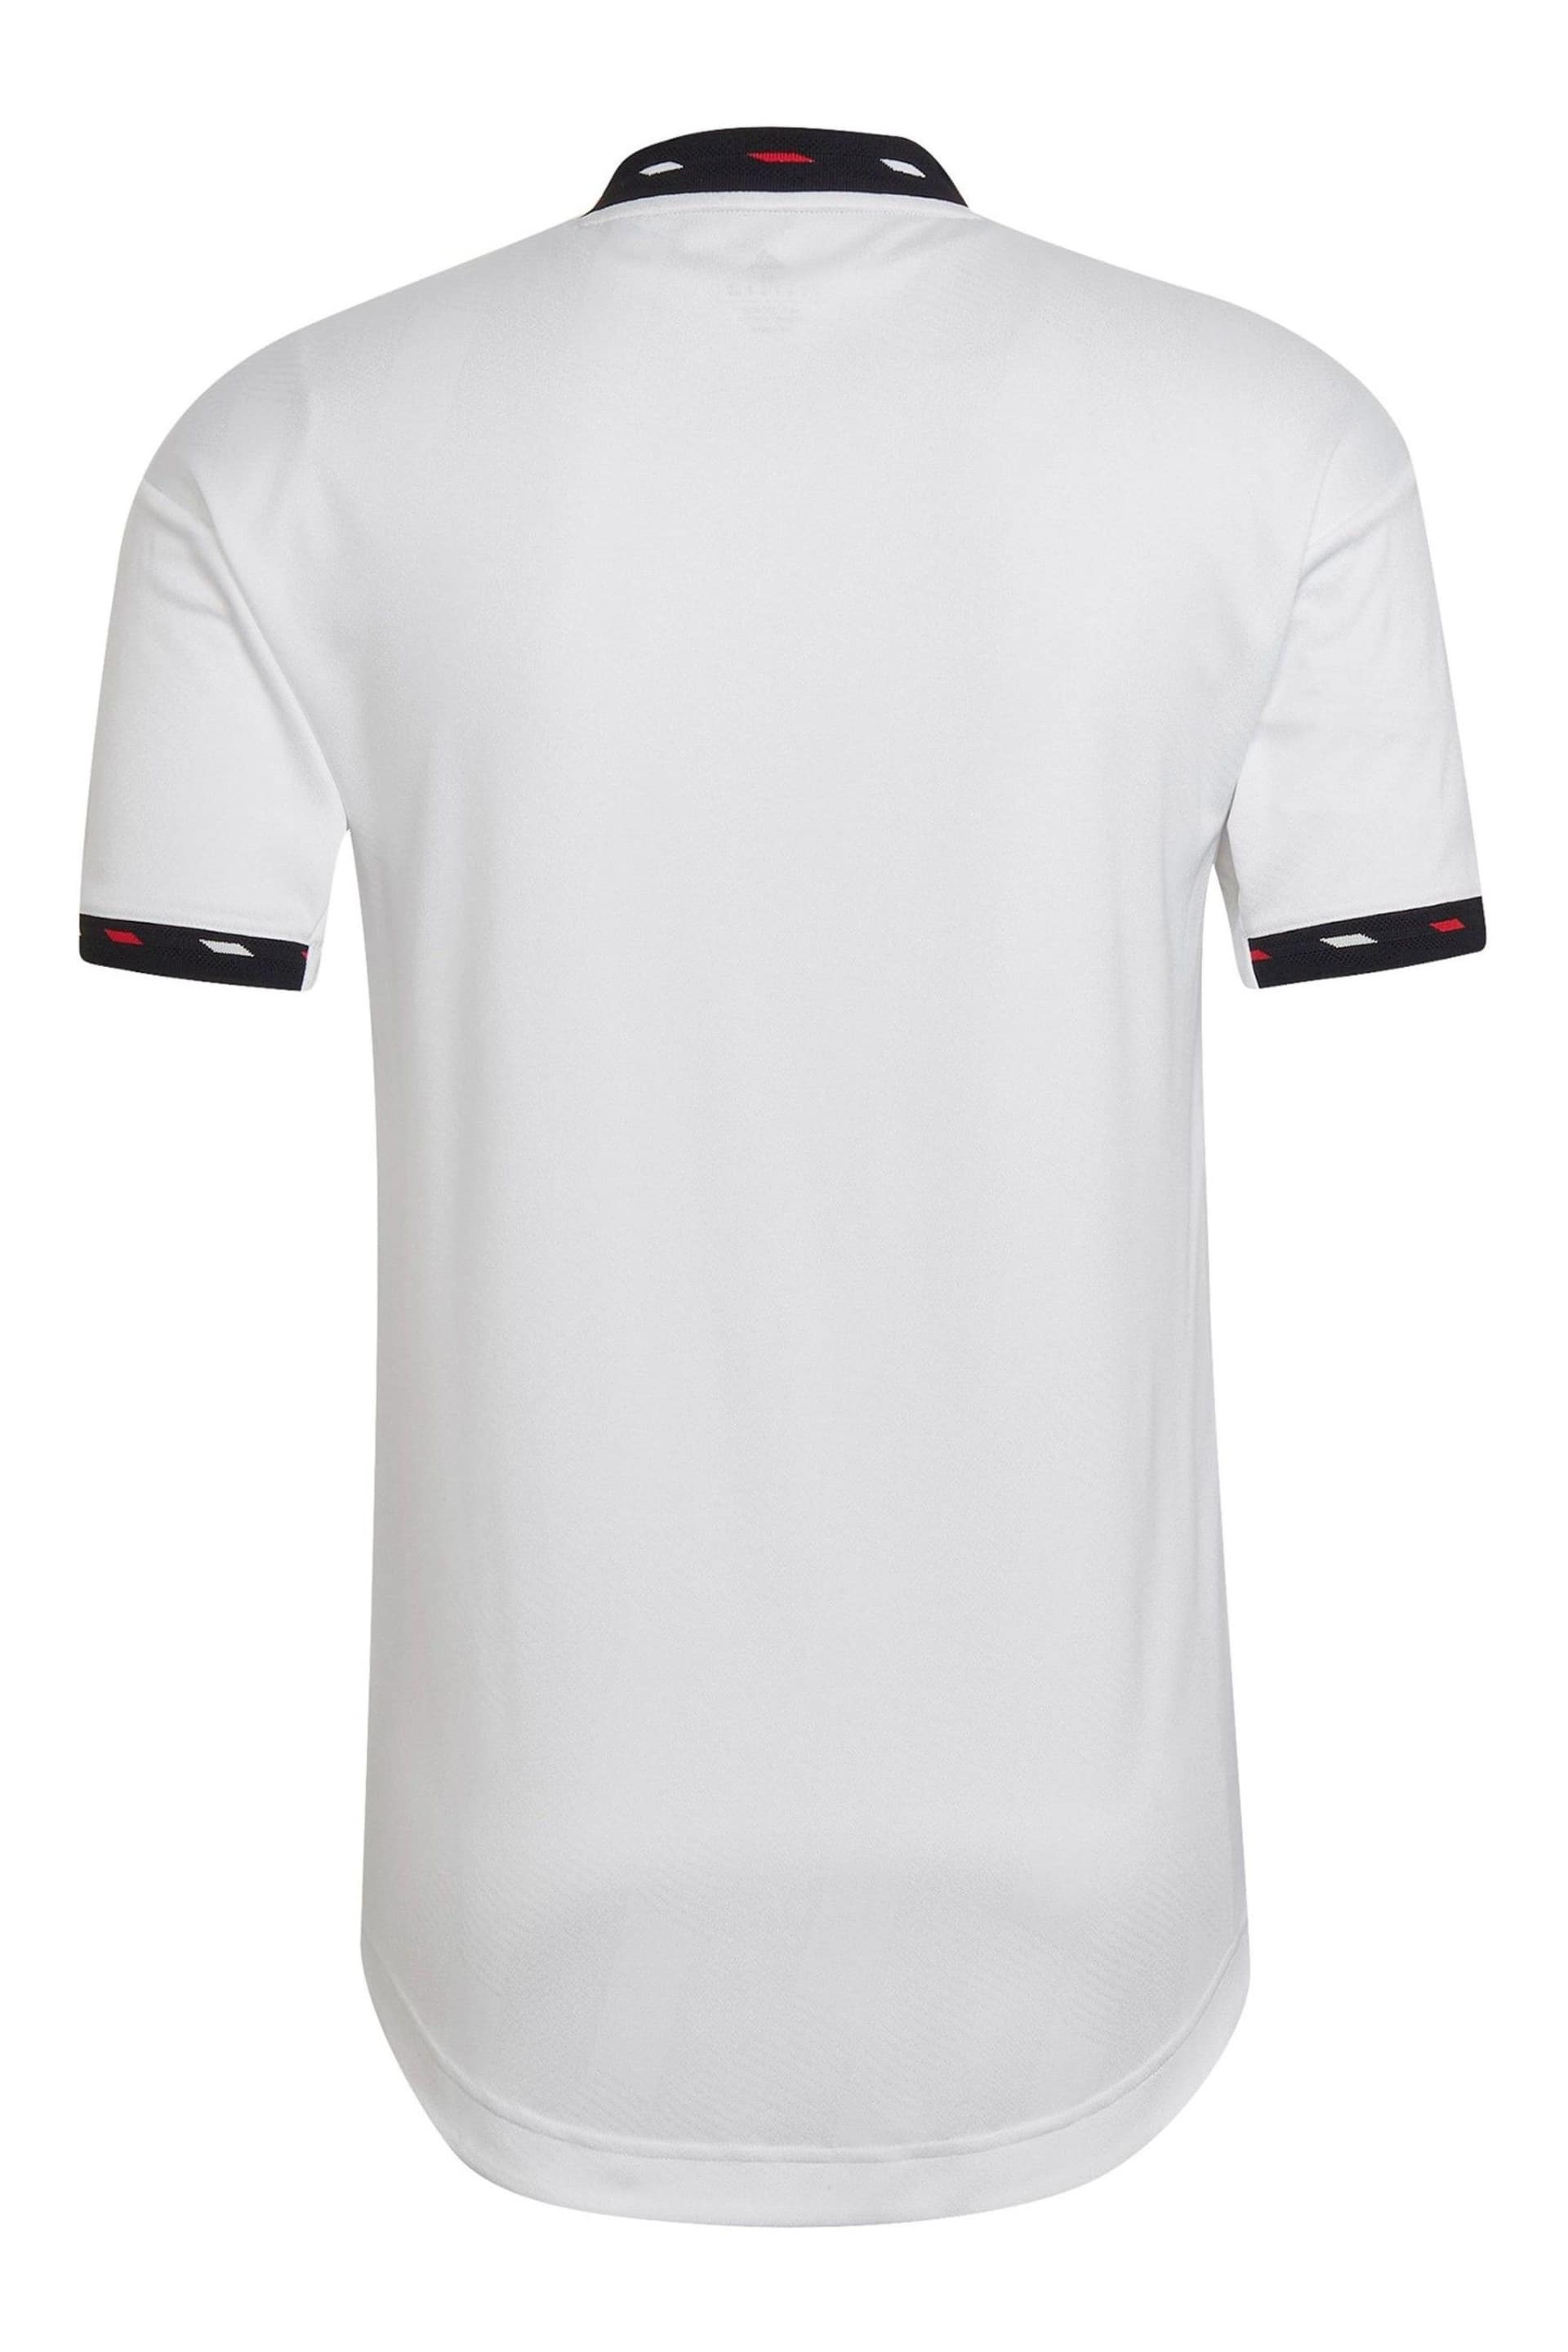 adidas White Blank Manchester United 2022-23 Away Authentic Shirt - Image 3 of 3